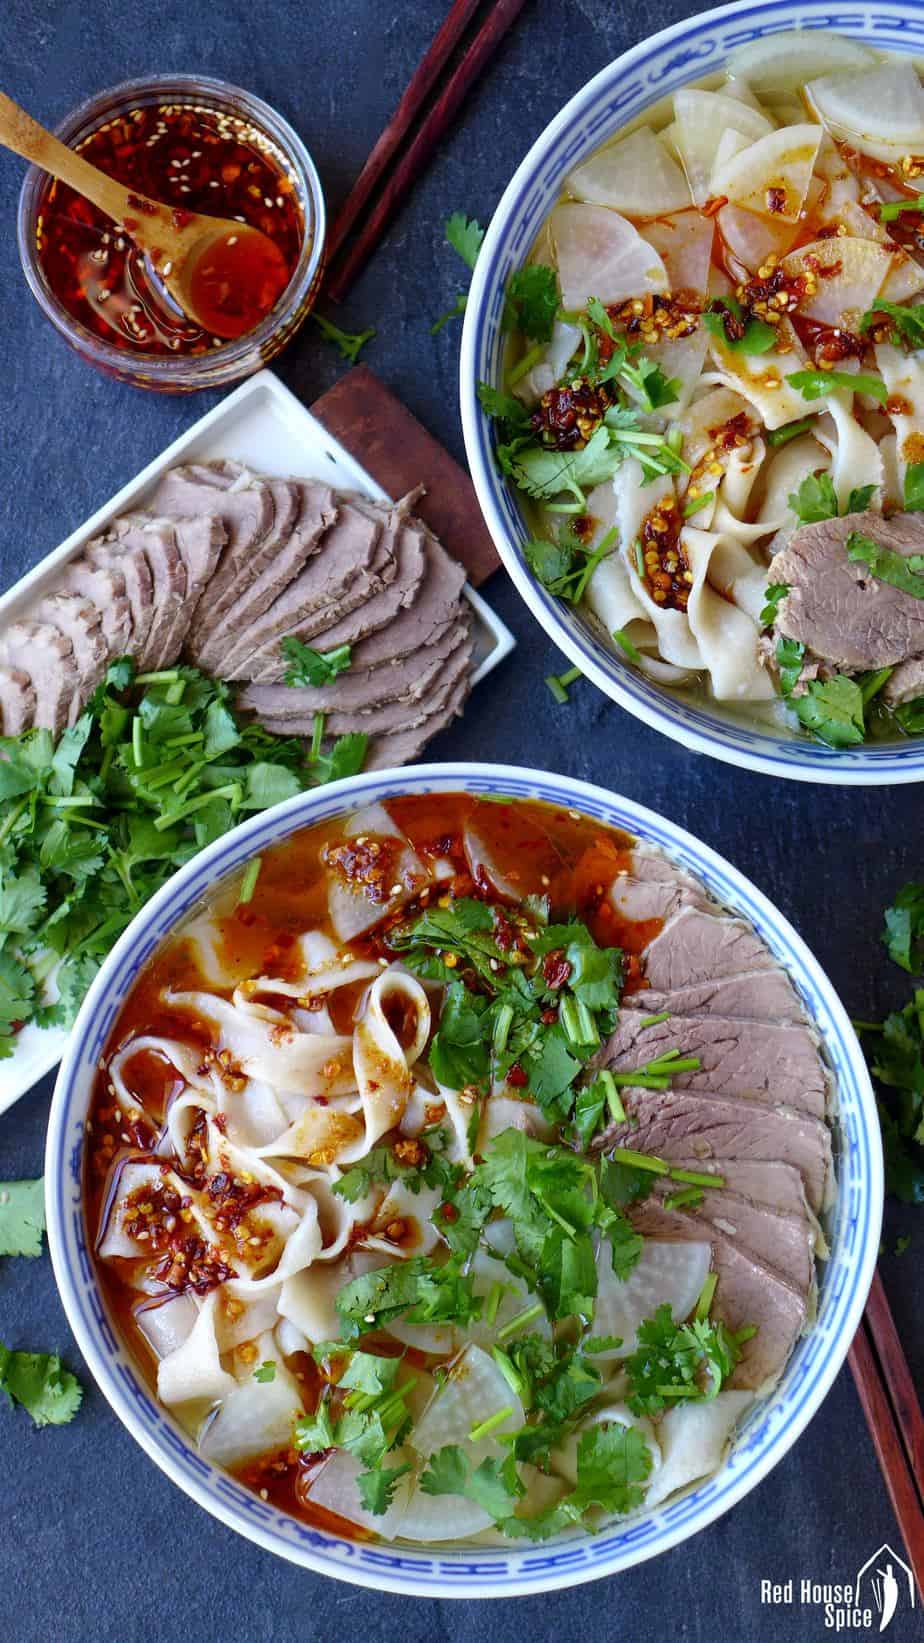 Lanzhou beef noodles is one of the best Chinese muslim foods